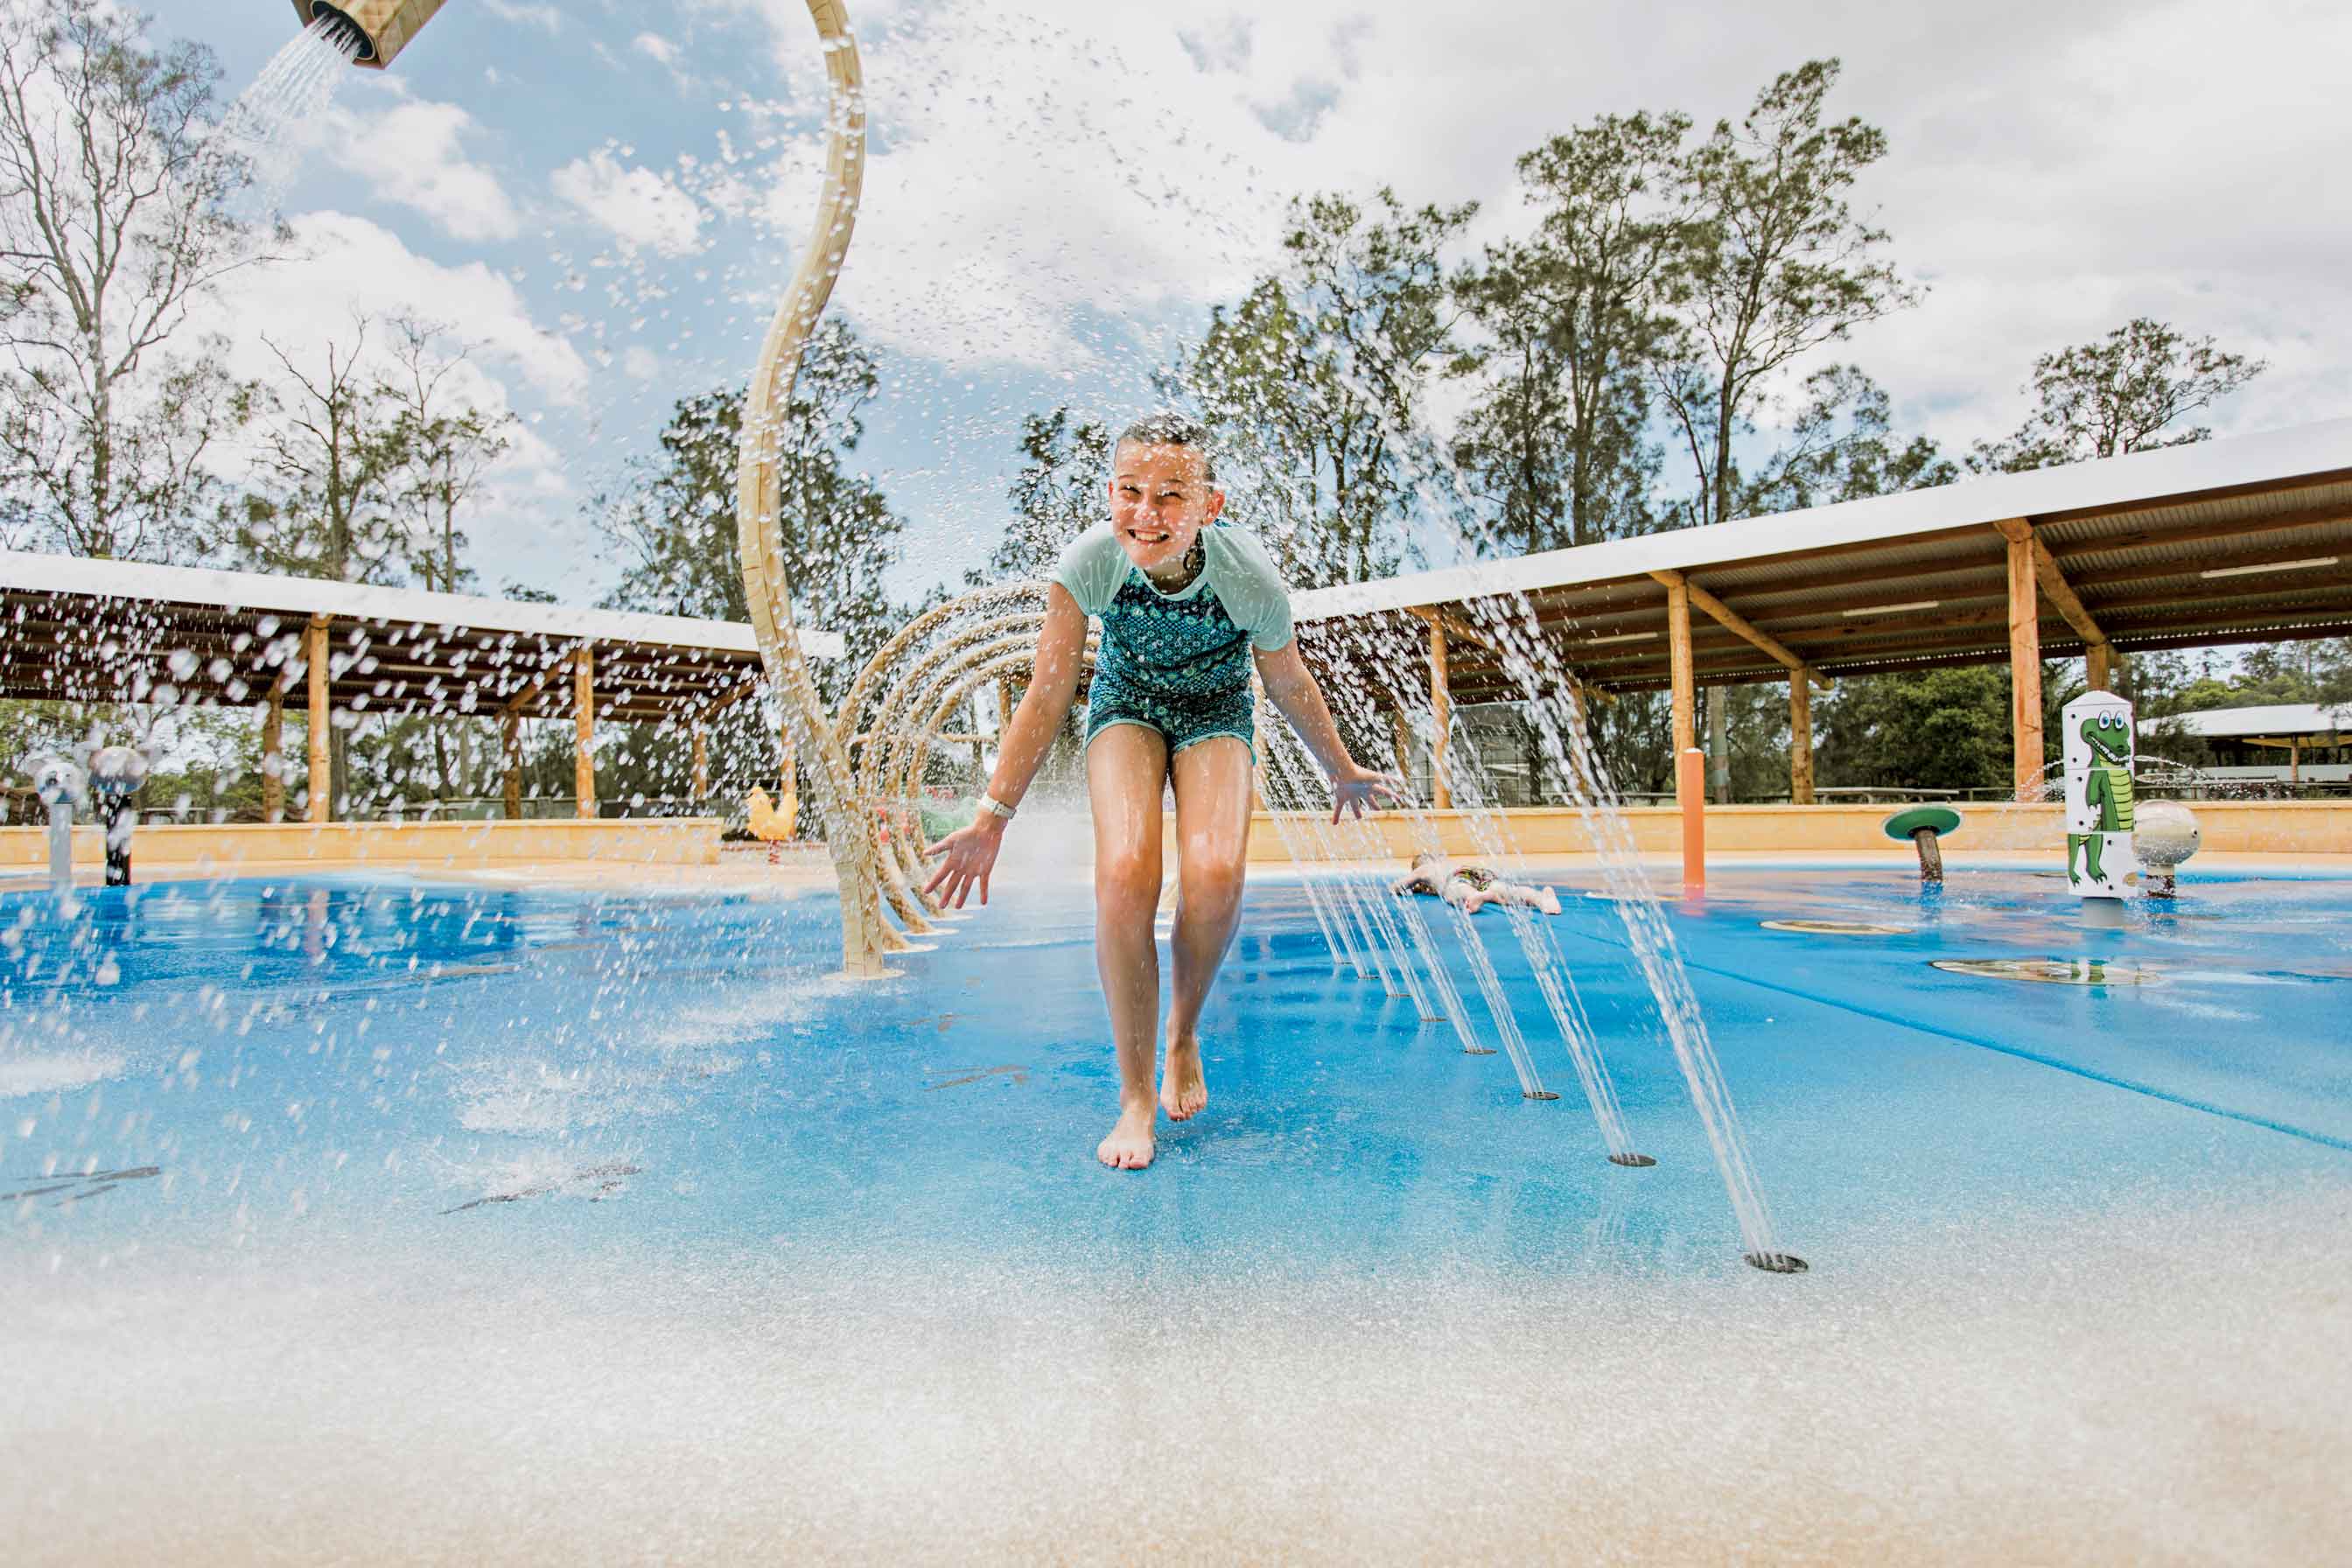 Water Games for Playgrounds